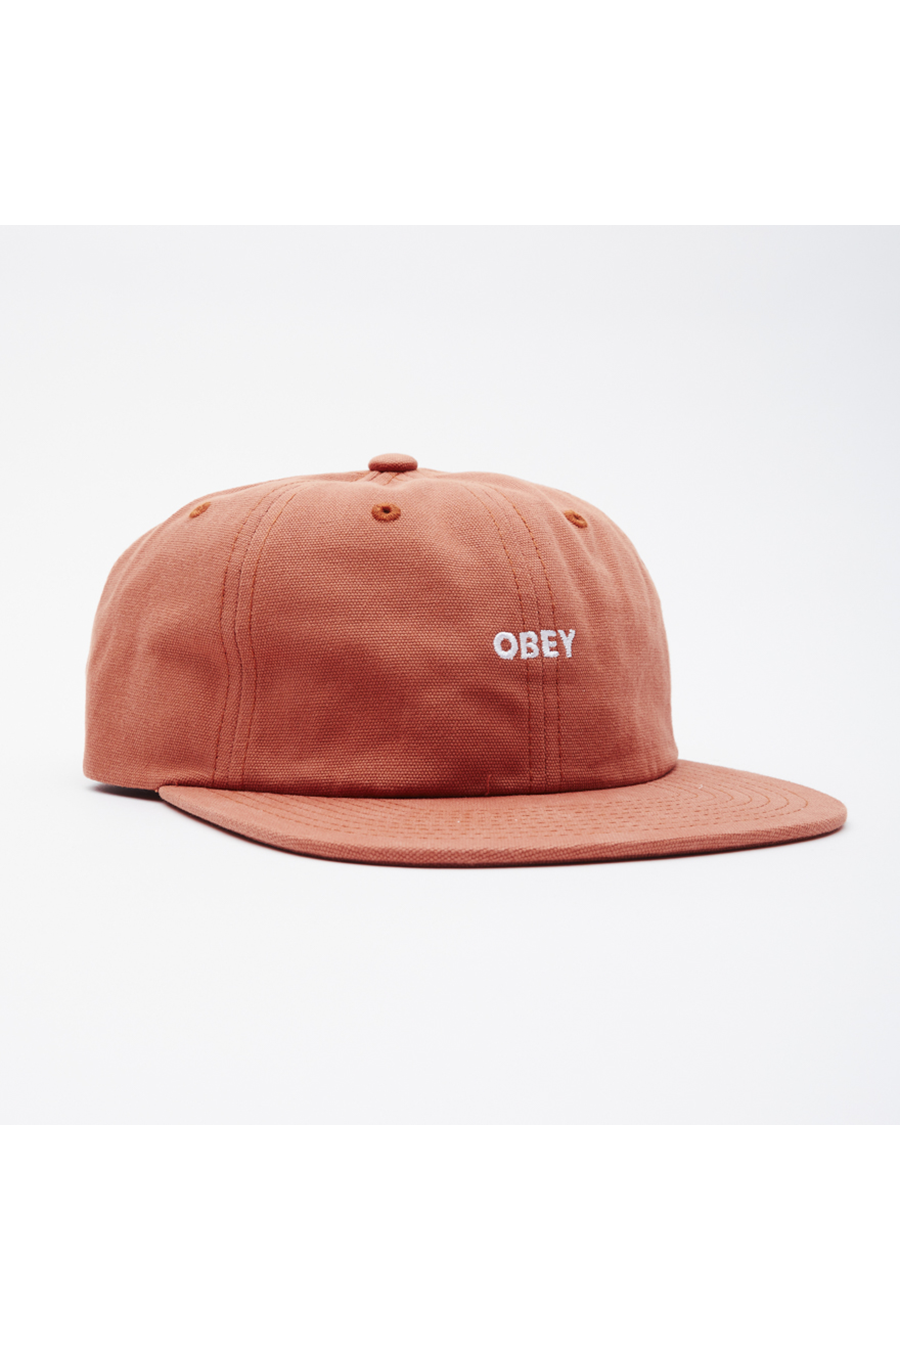 Bold Washed Canvas 6 Panel | Ginger - Main Image Number 1 of 2